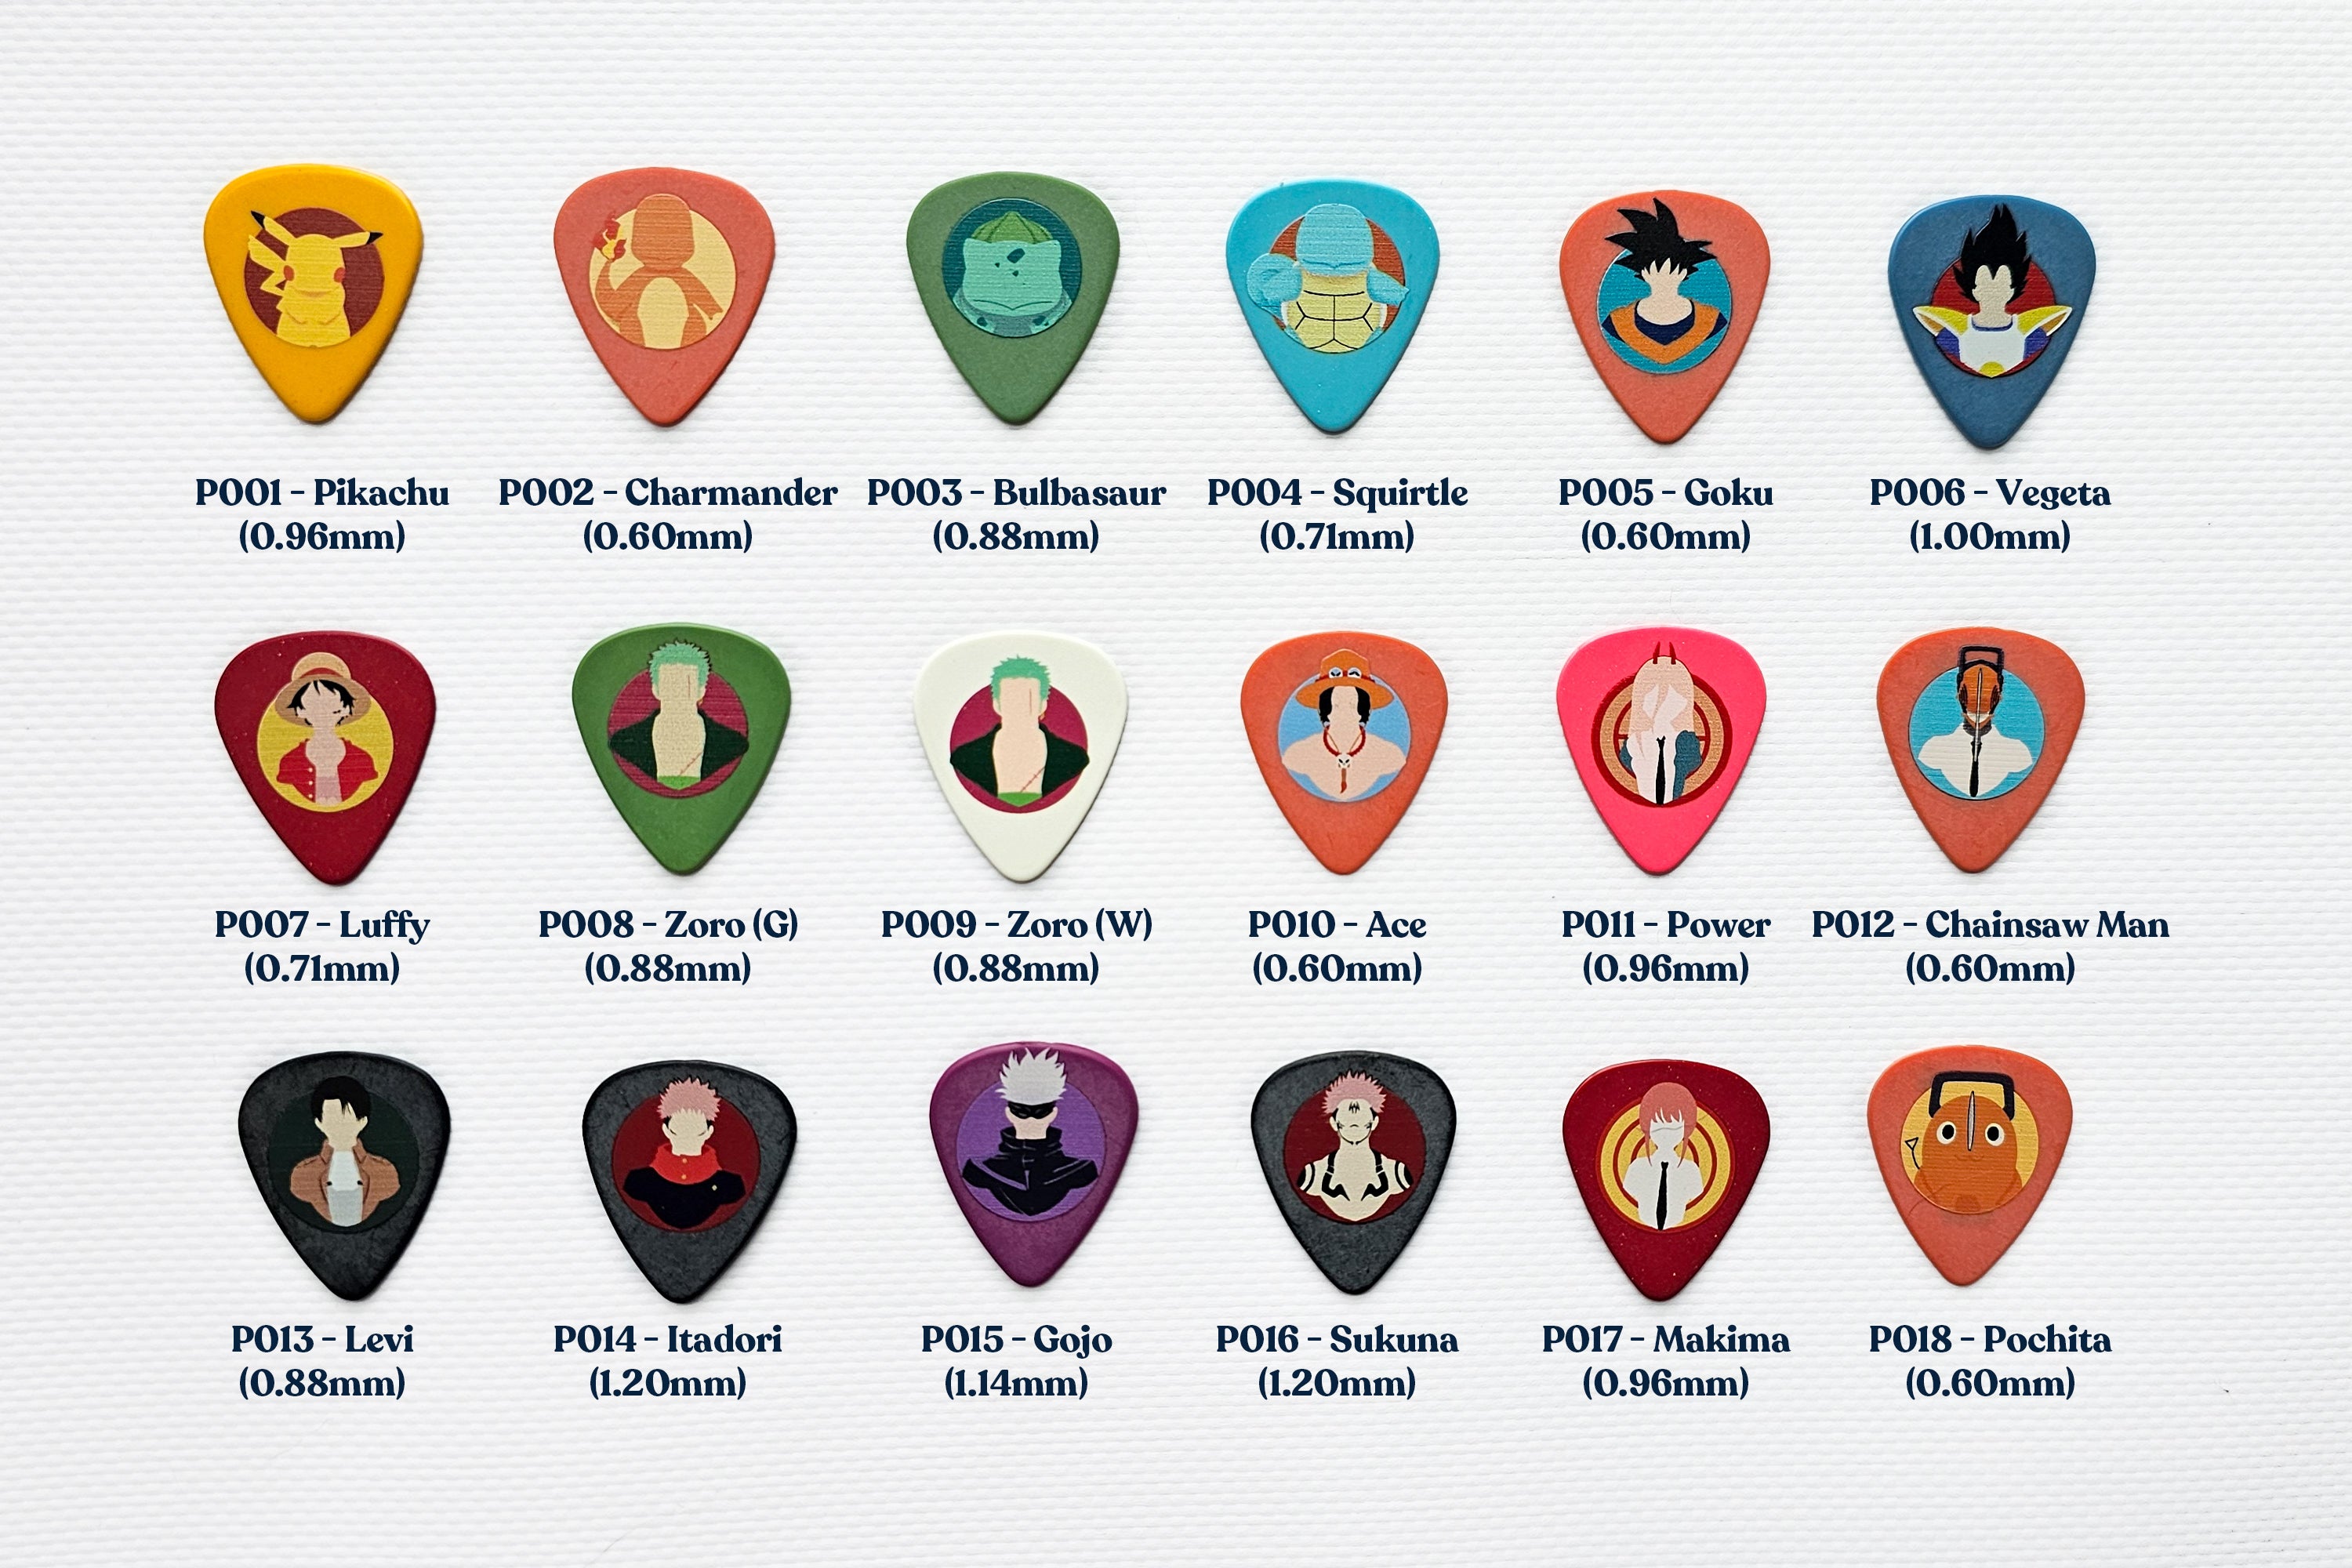 20  Pack of Anime and Pop Culture Guitar Picks